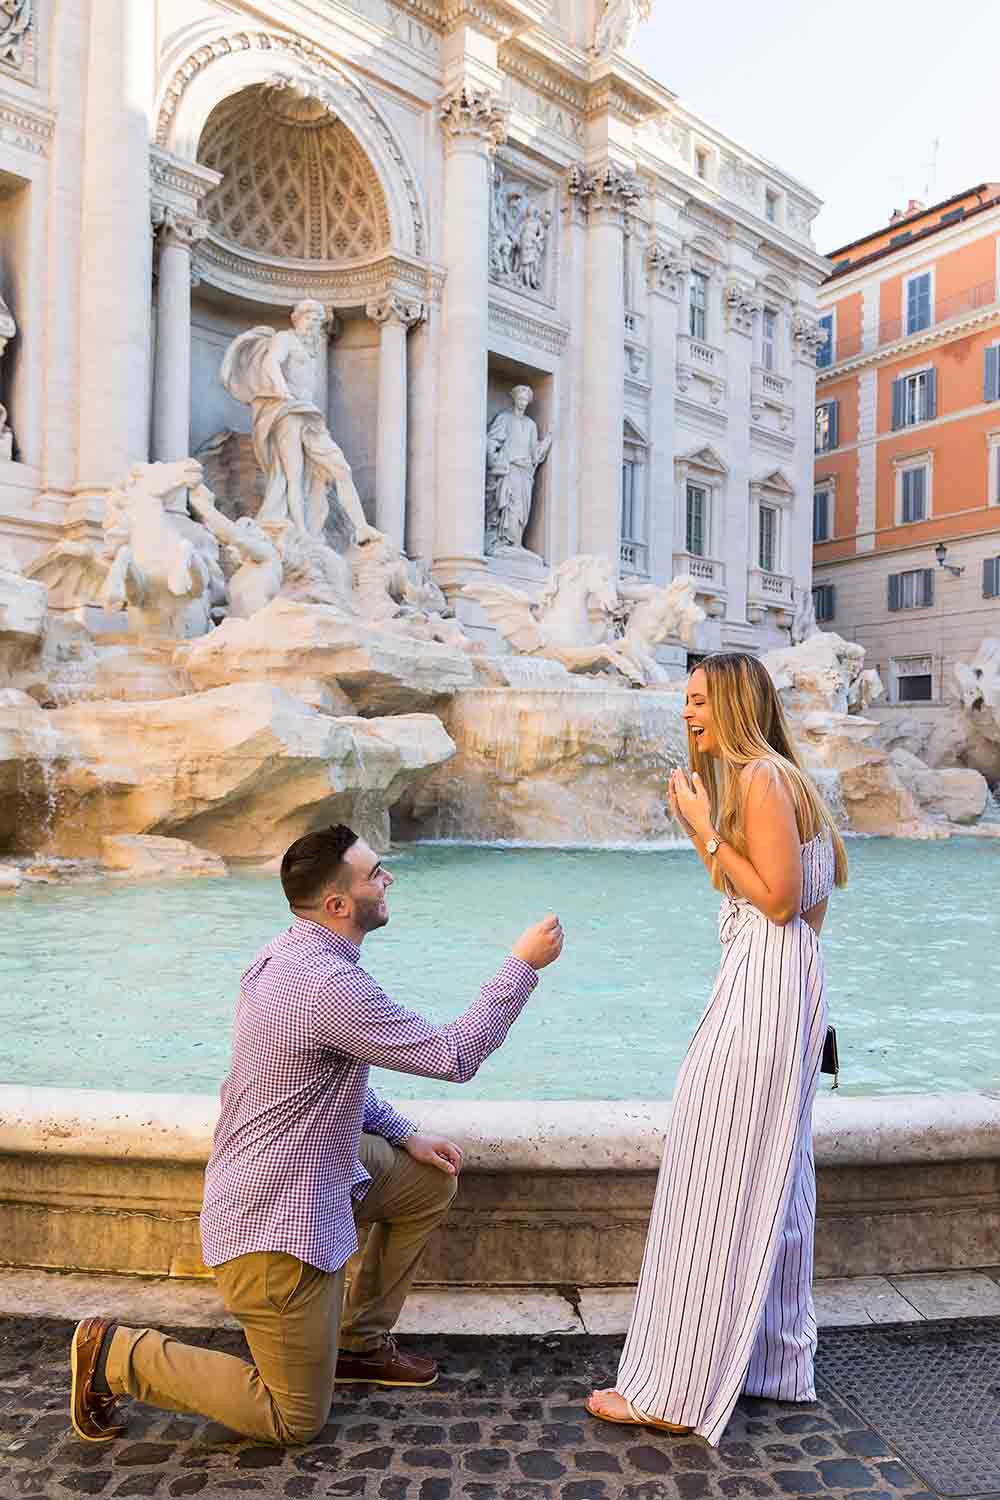 Surprise wedding proposal in Rome at the Trevi fountain